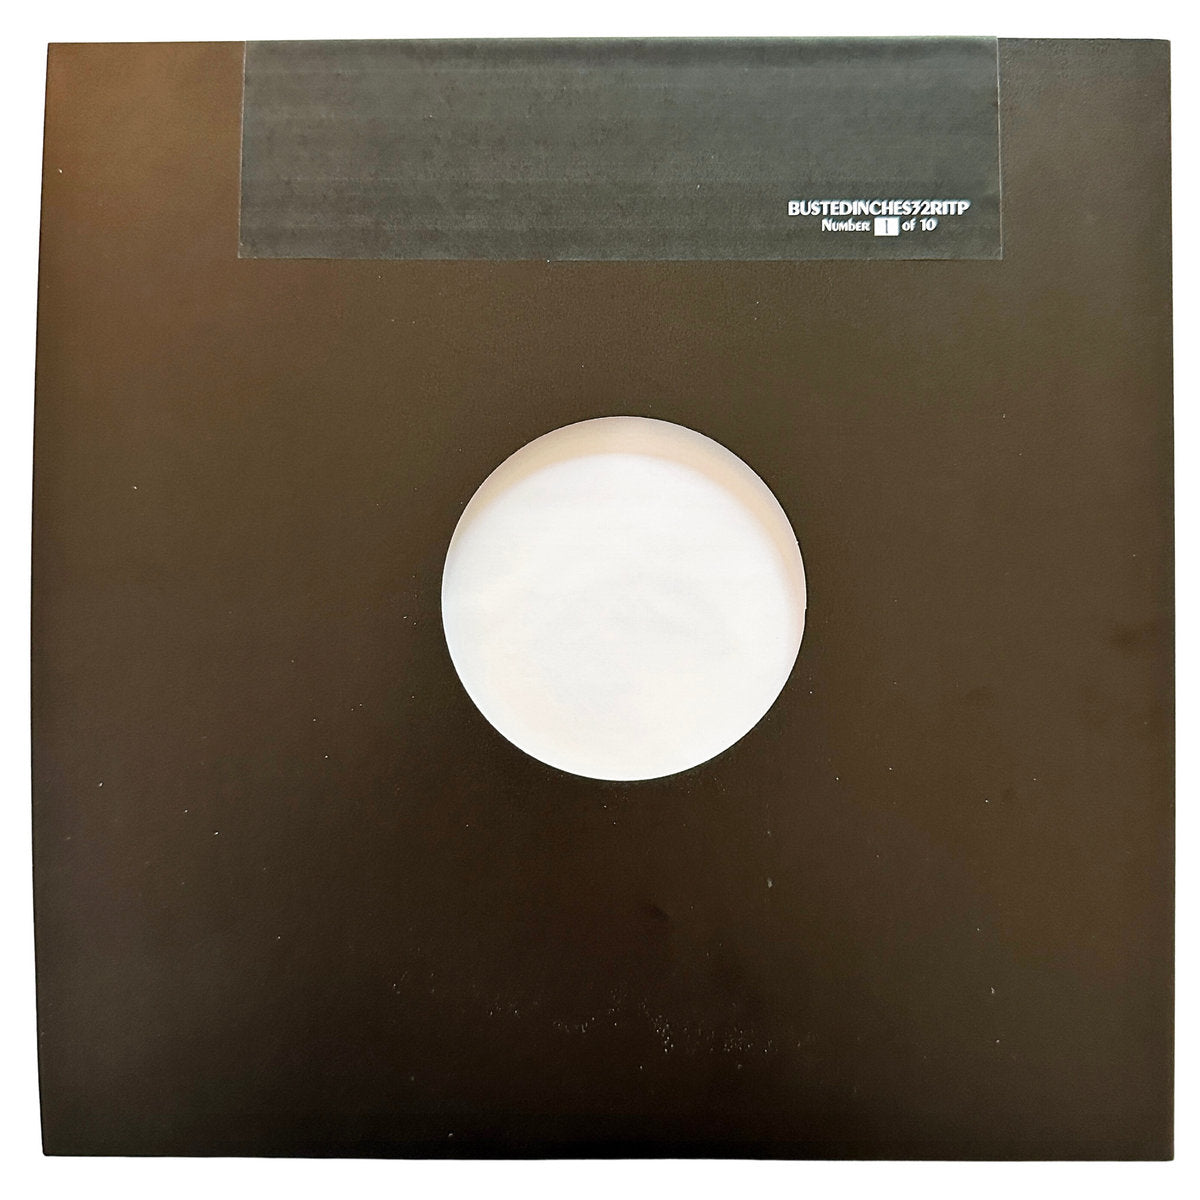 Emapea - Seeds, Roots & Fruits - Limited Edition 12 Inch Vinyl Reissue Test Pressing - Cold Busted